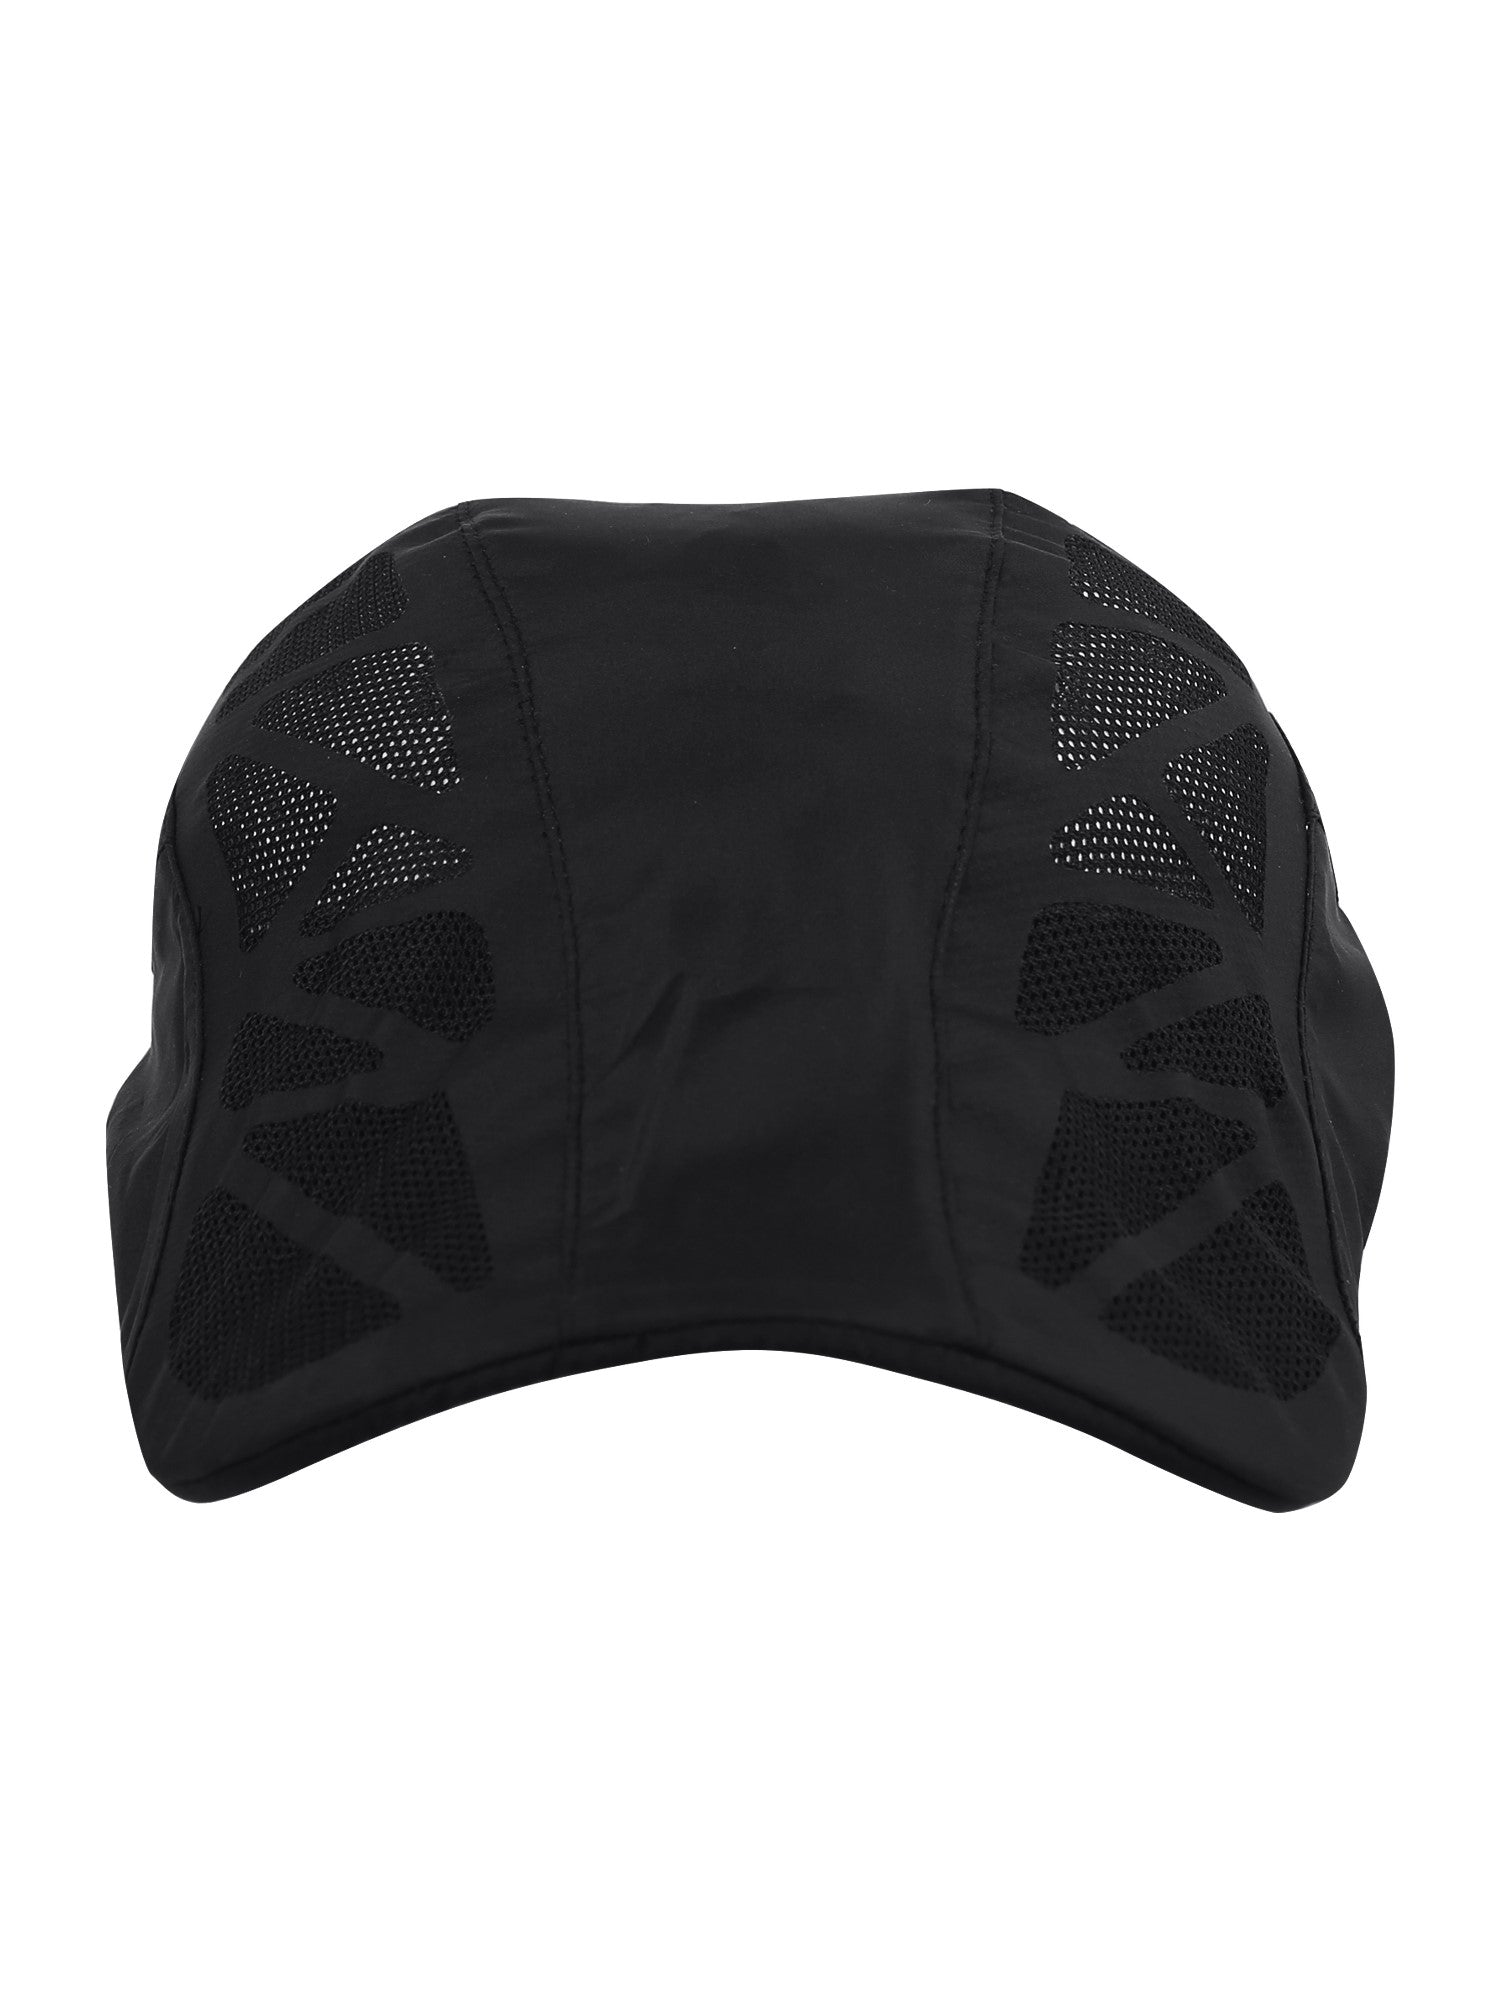 FabSports Quick Dry Caps / Hats for Men & Women, Ideal for Outdoor sports  with UV protection, Adjustable size(56-59 cm) freeshipping - FABSEASONS